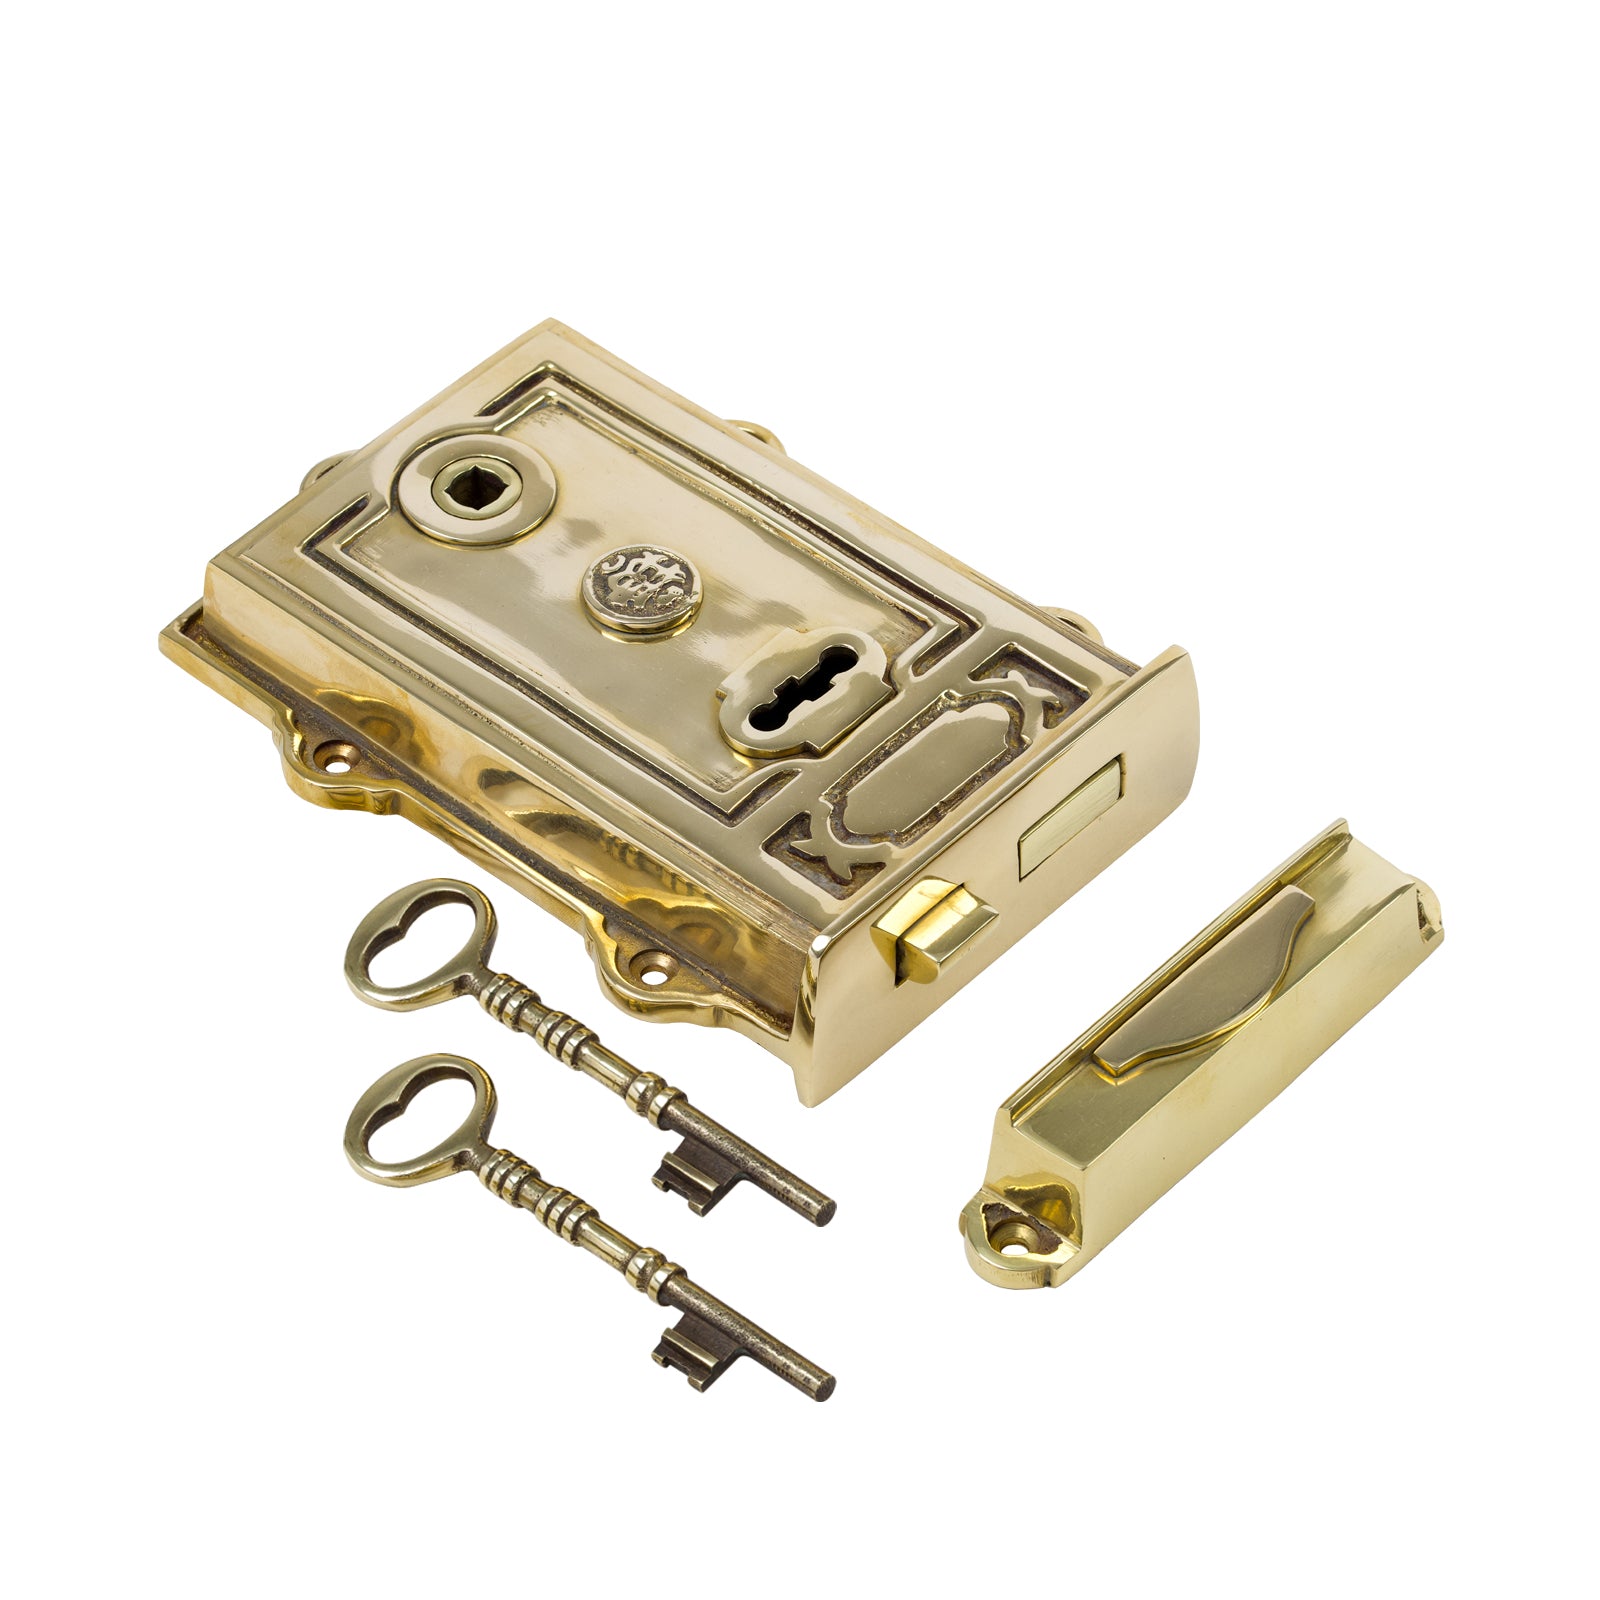 Ornate Brass Rim Lock with matching Keeper and Two Keys